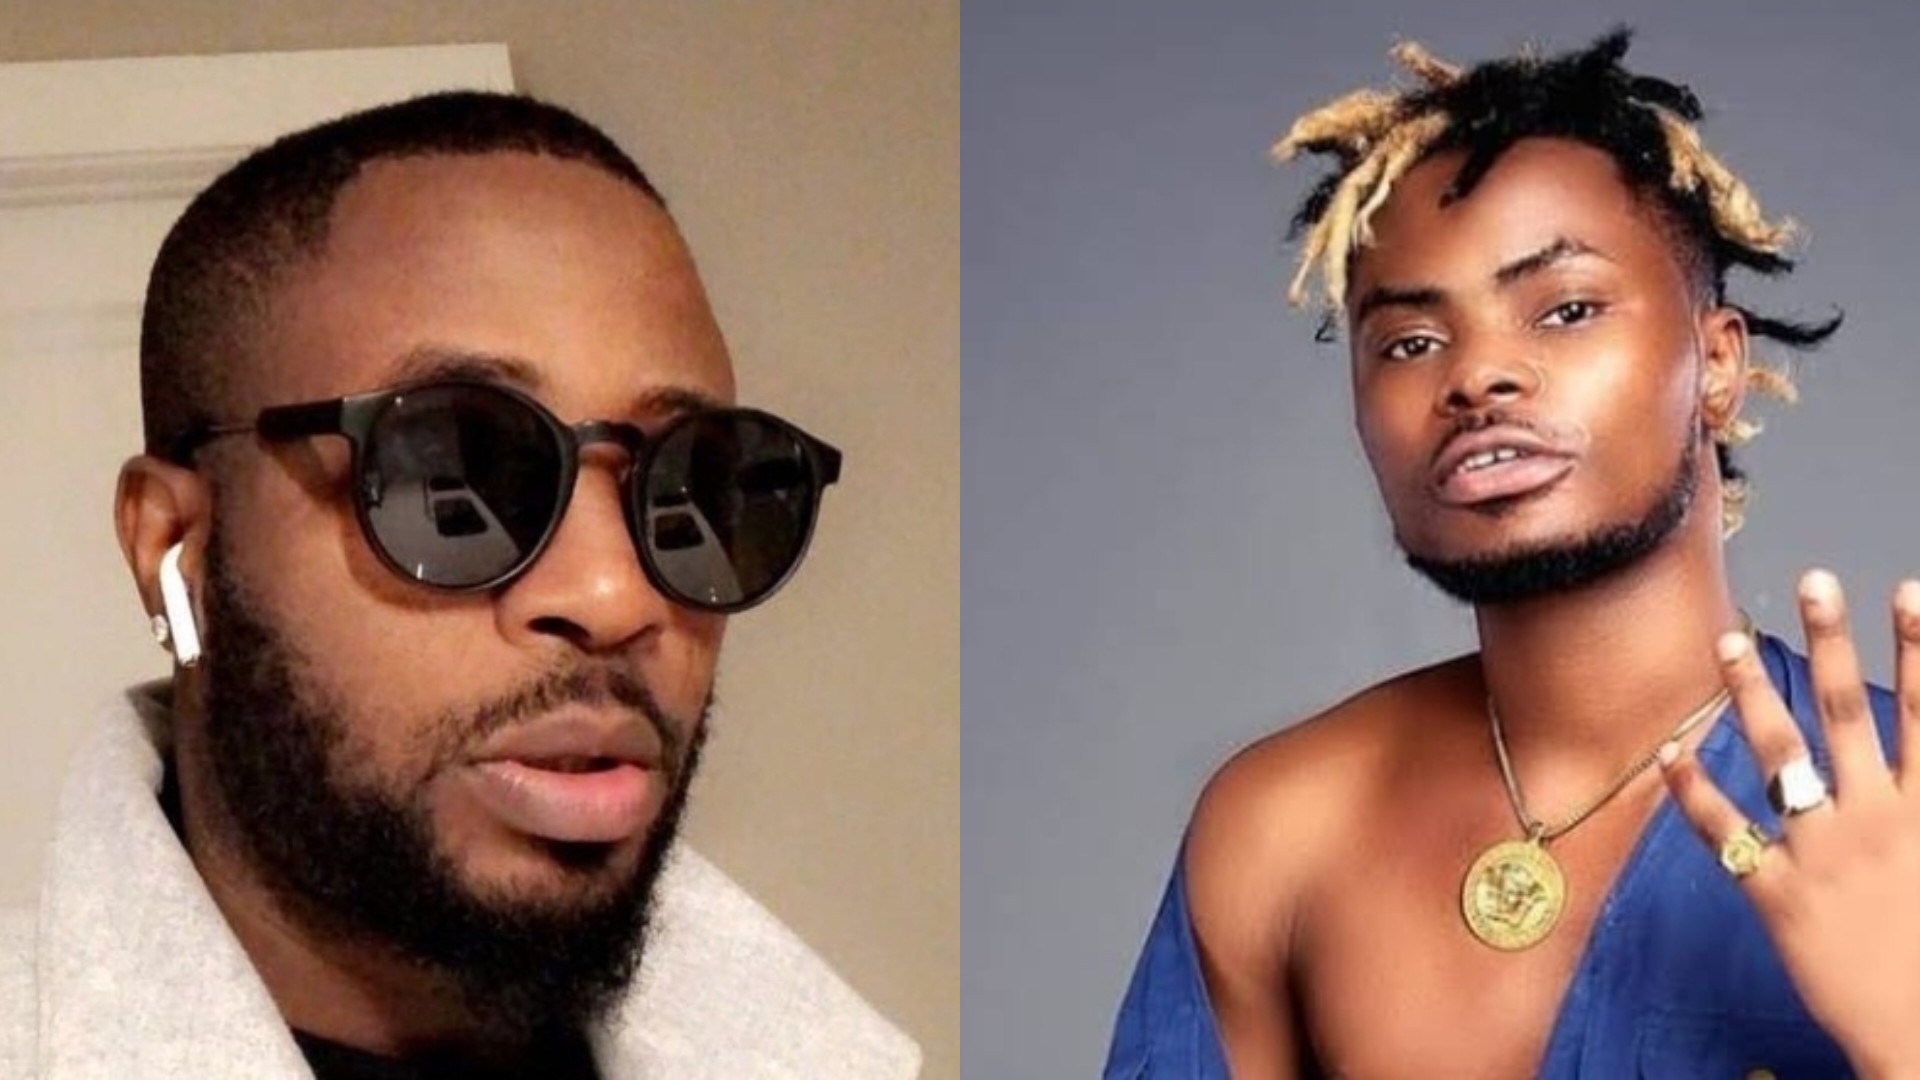 “He ignored my request to post my album but posted that I died for 3 days” – Oladips slams Tunde Ednut (video)